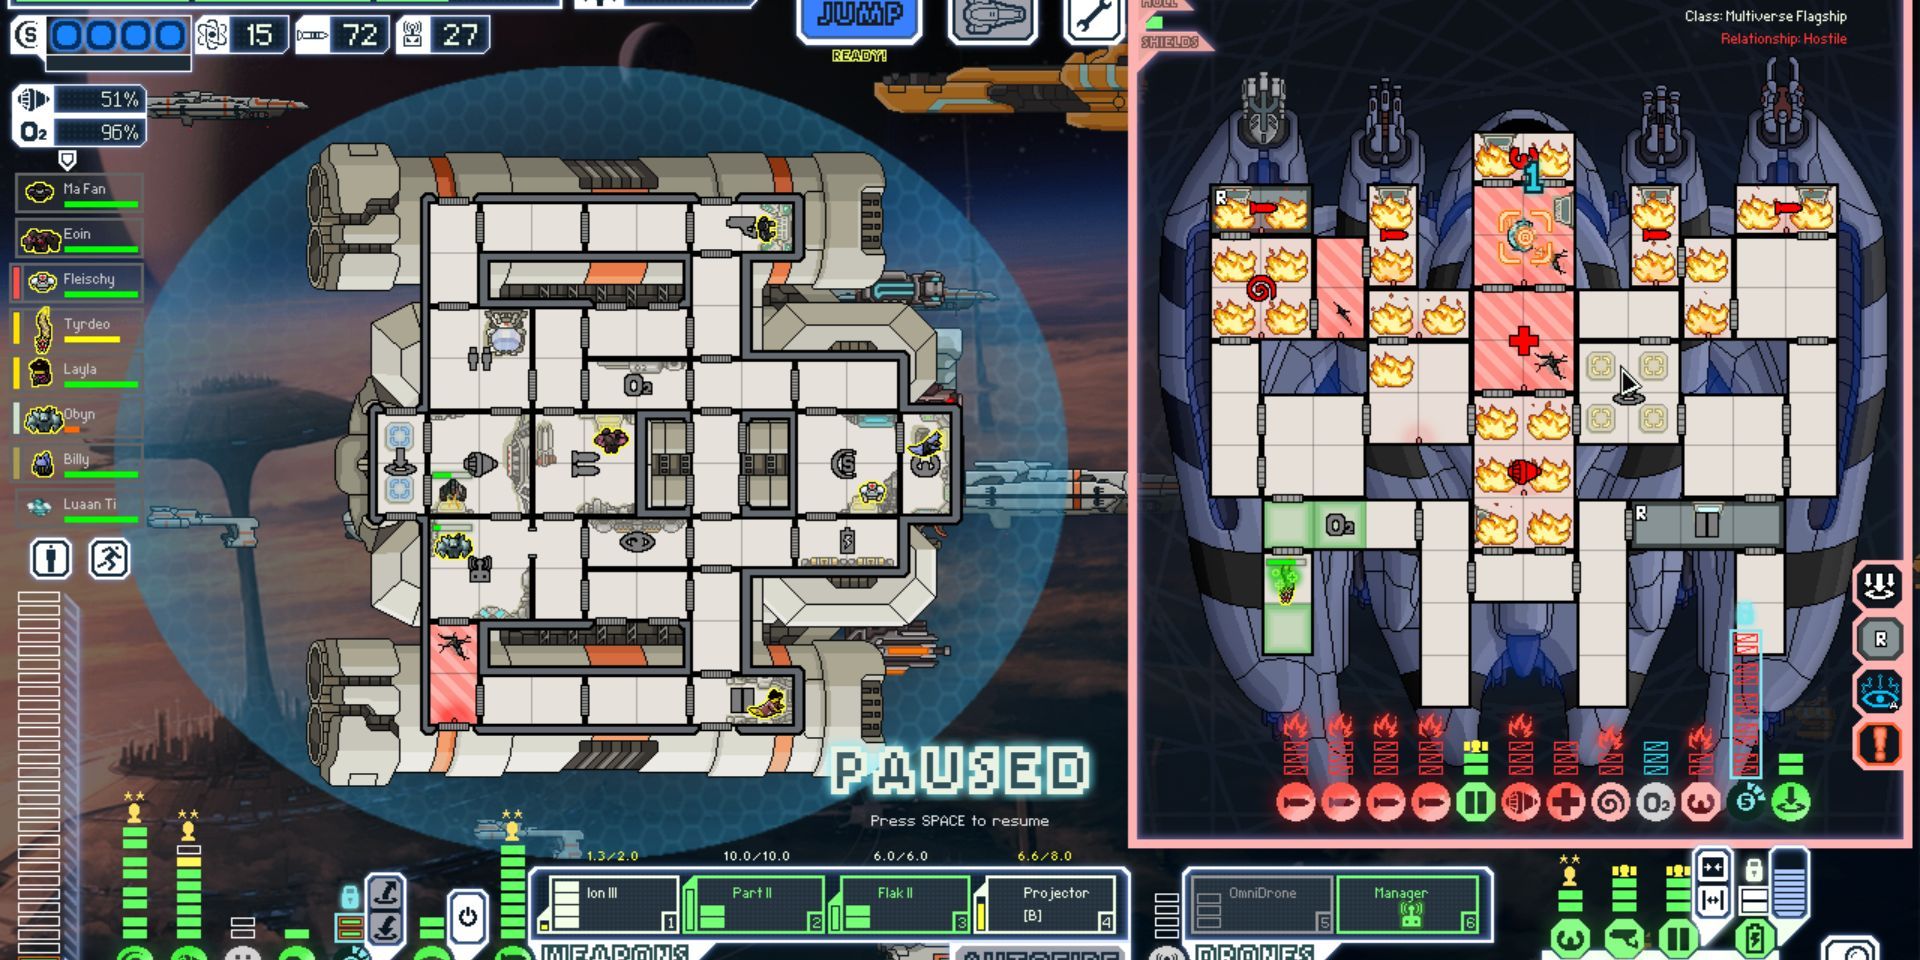 Gameplay from the video game FTL: Faster Than Light.